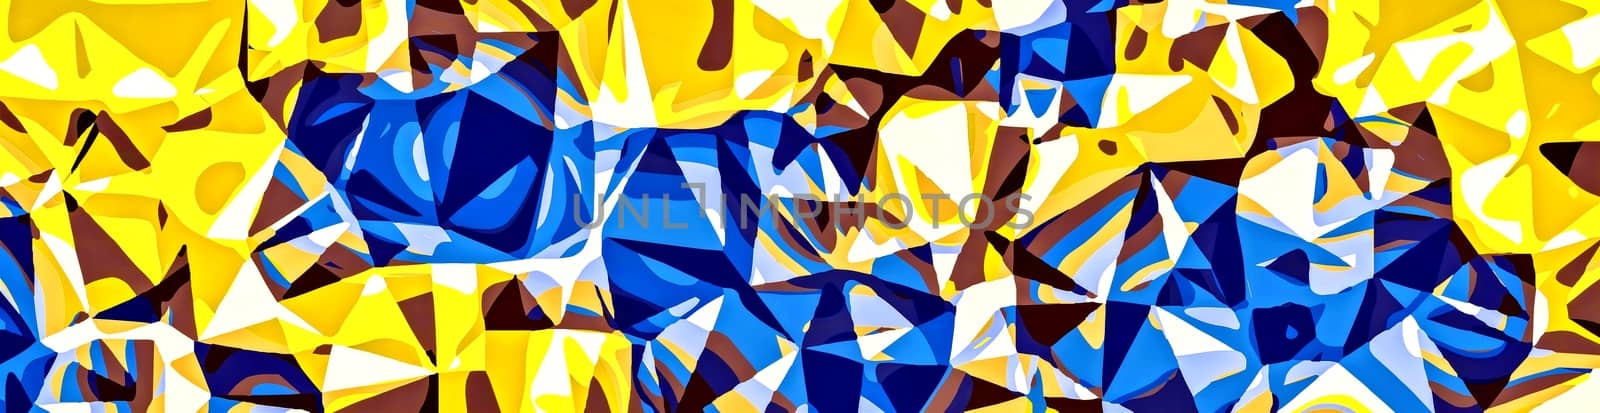 blue and yellow painting abstract background in panorama